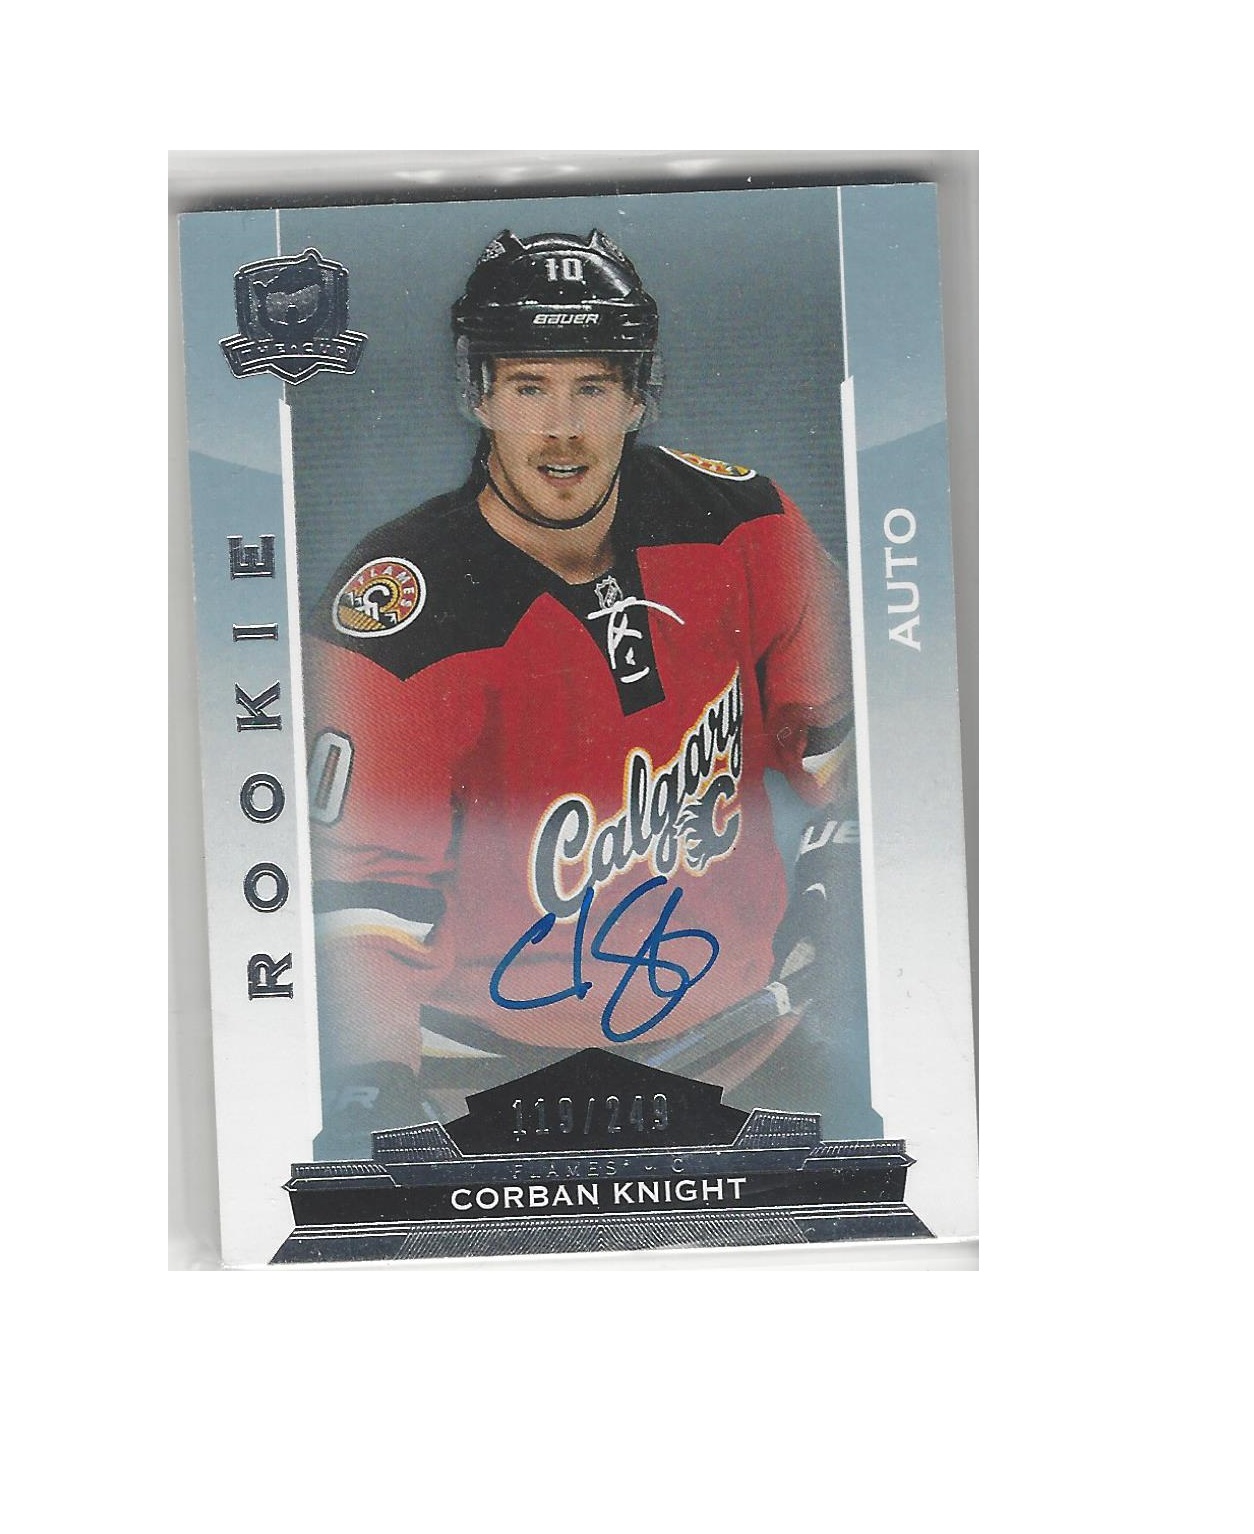 2014-15 The Cup #97 Corban Knight AU RC (80-X96-FLAMES)